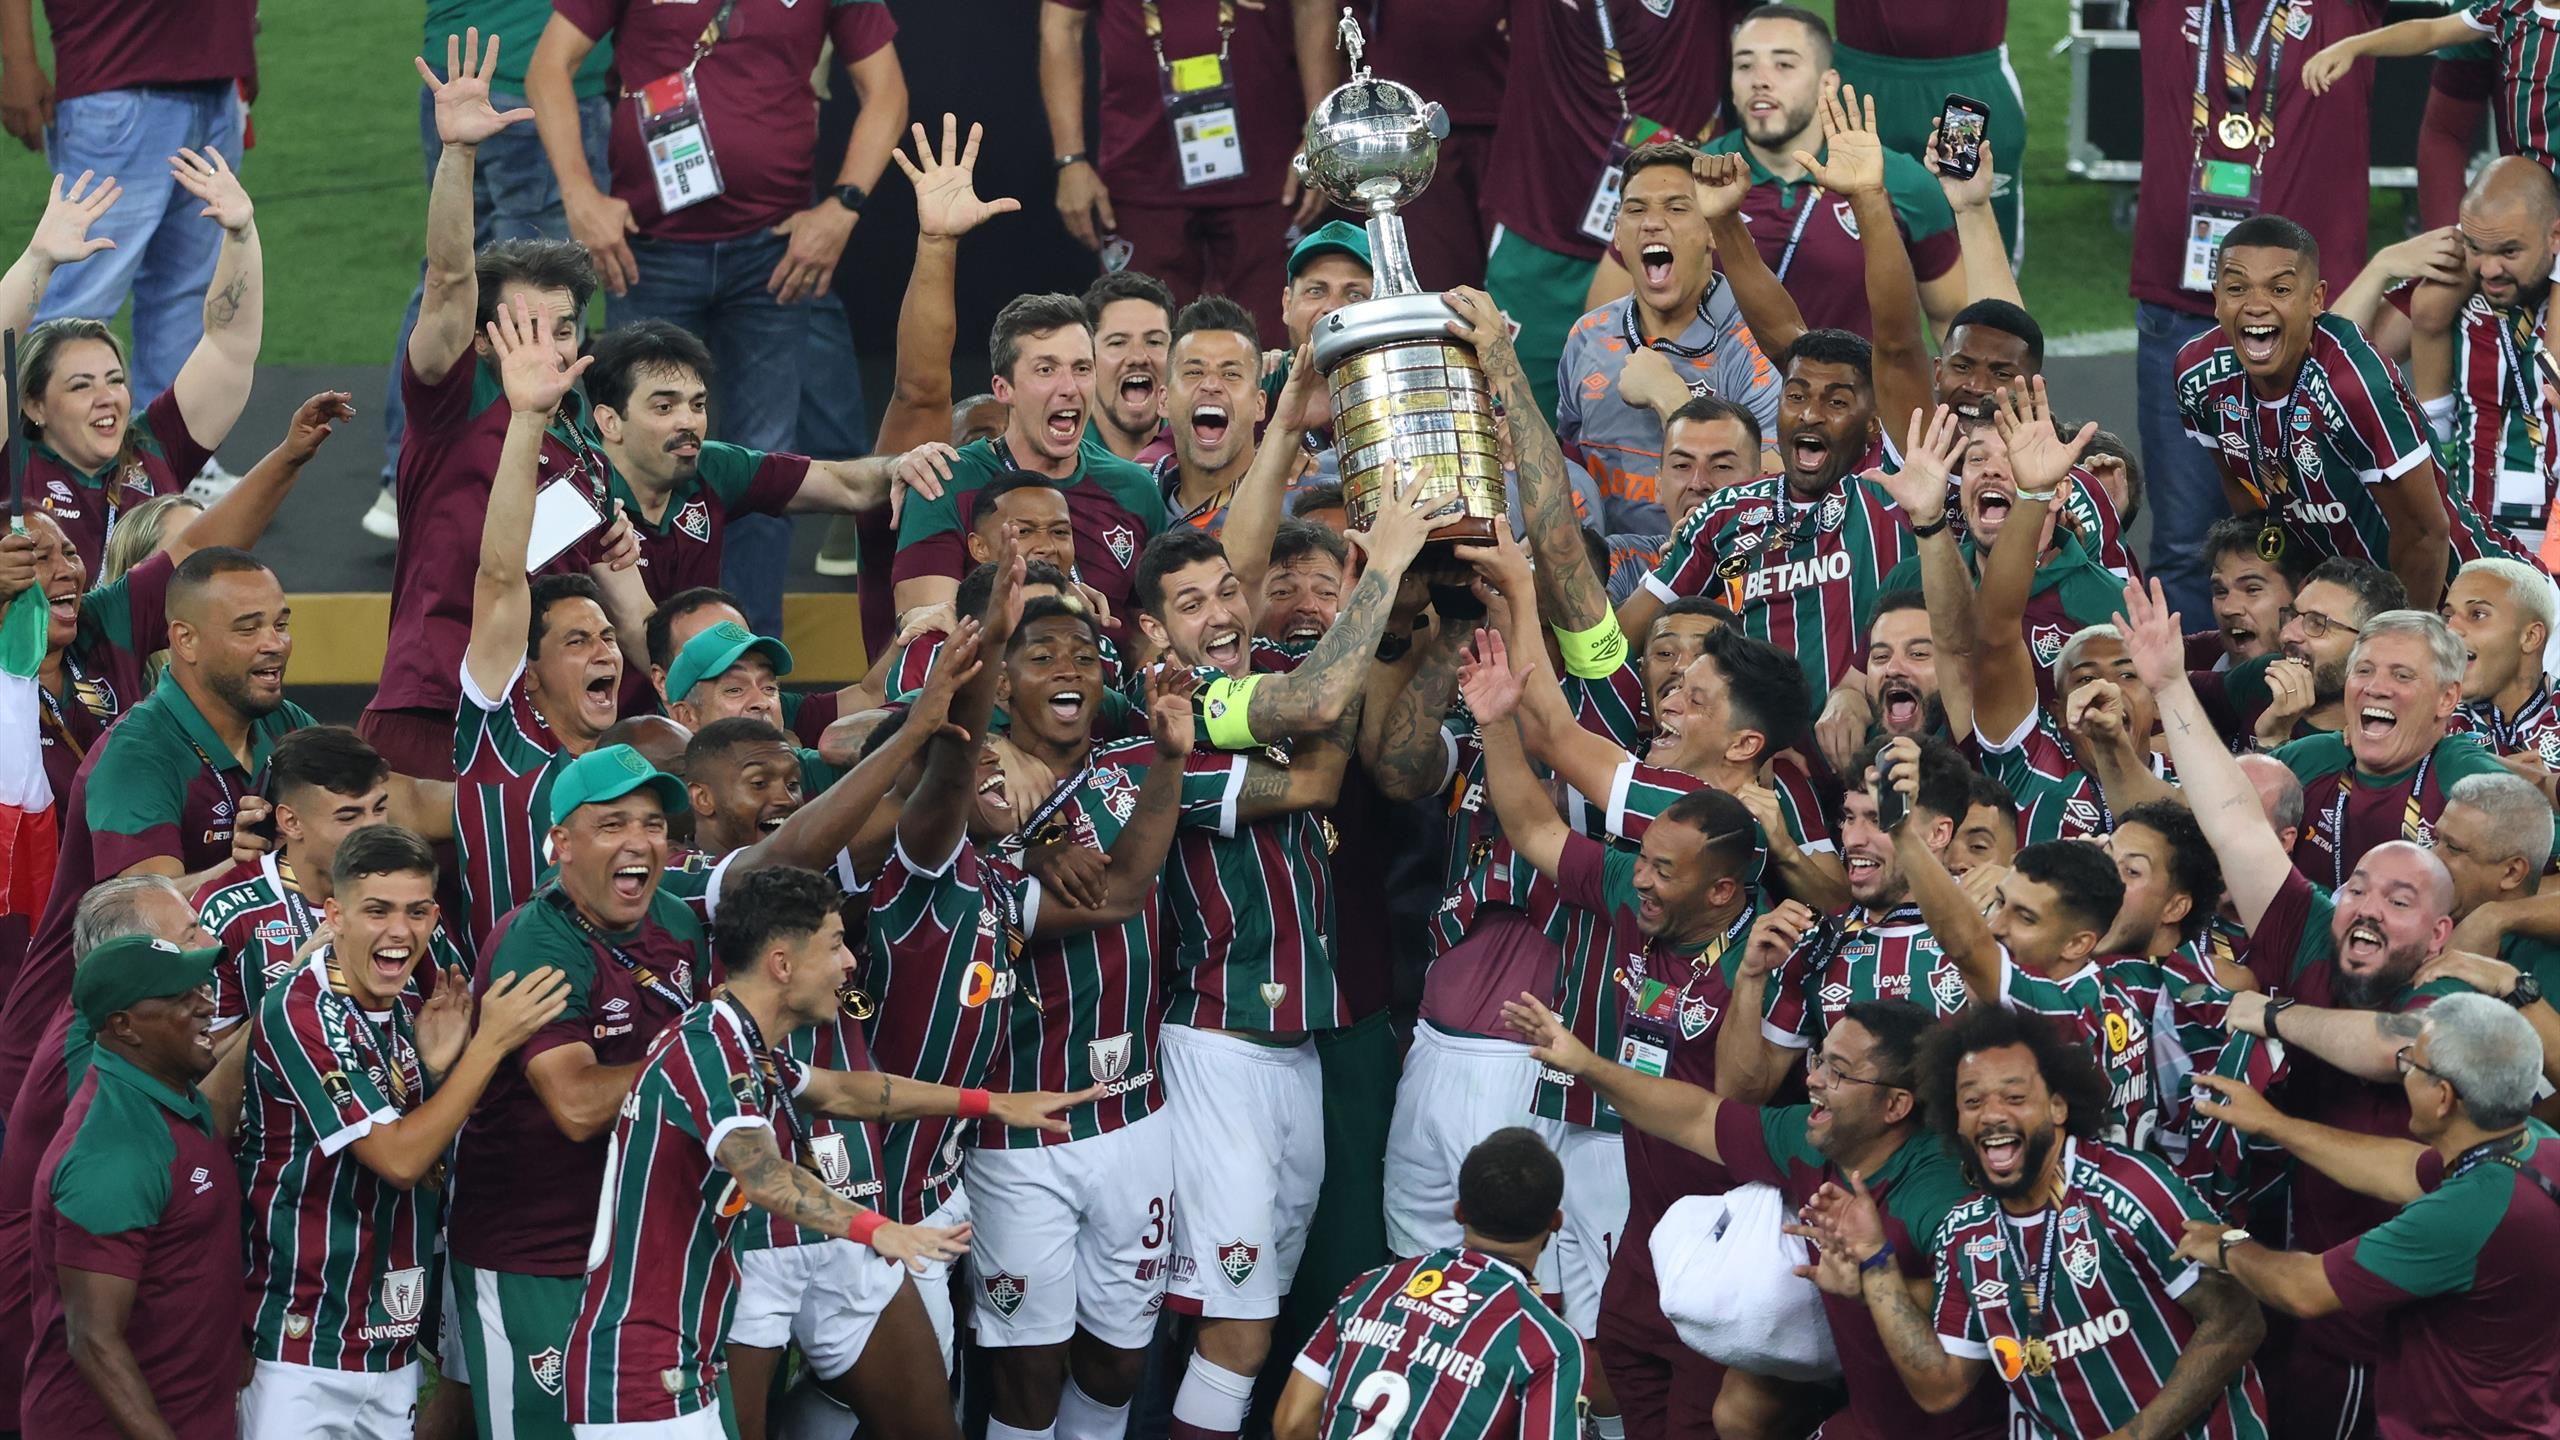 Copa Libertadores 2023: Free and Paid Live Streams Worldwide